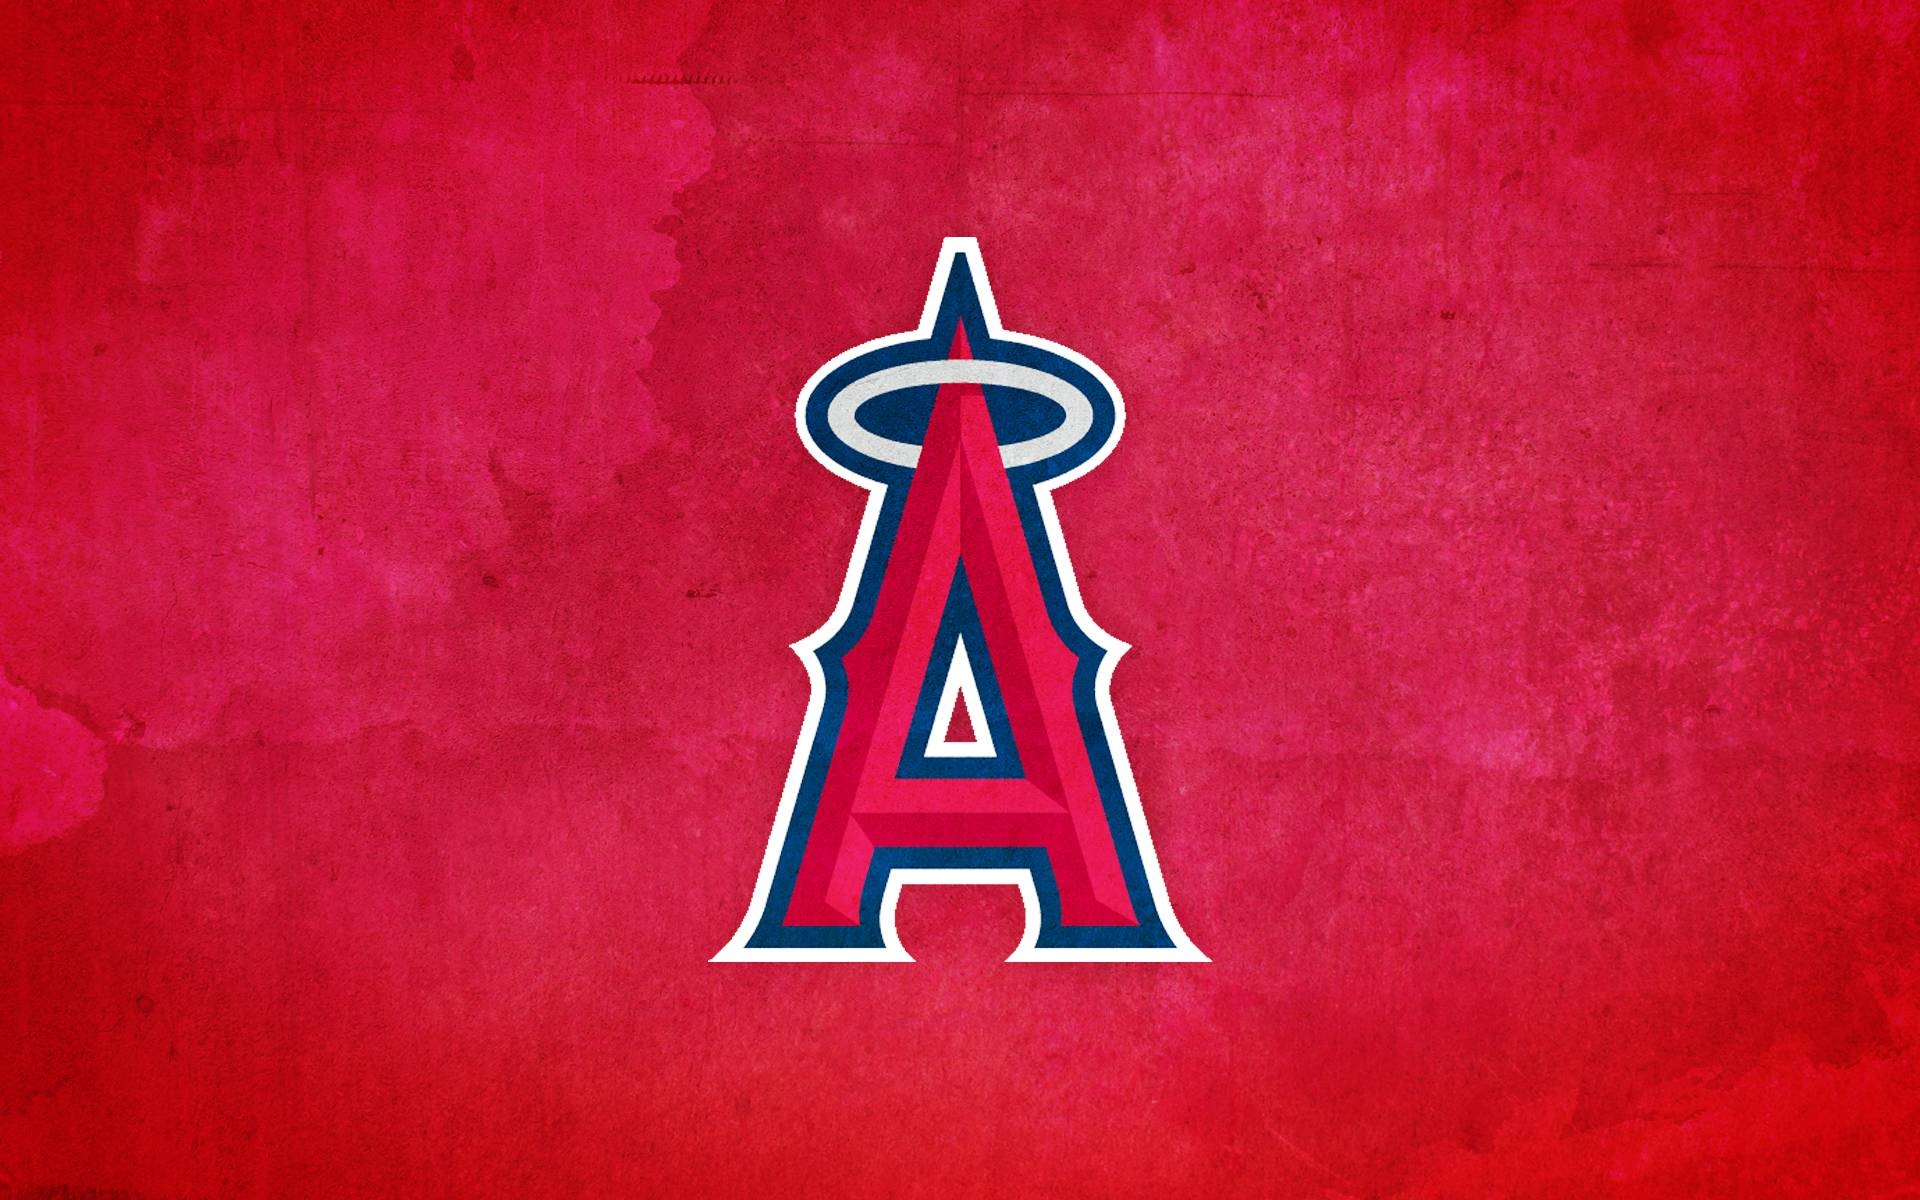 Los Angeles Angels wallpapers, Top-notch collection, Backgrounds for fans, Sports spirit, 1920x1200 HD Desktop